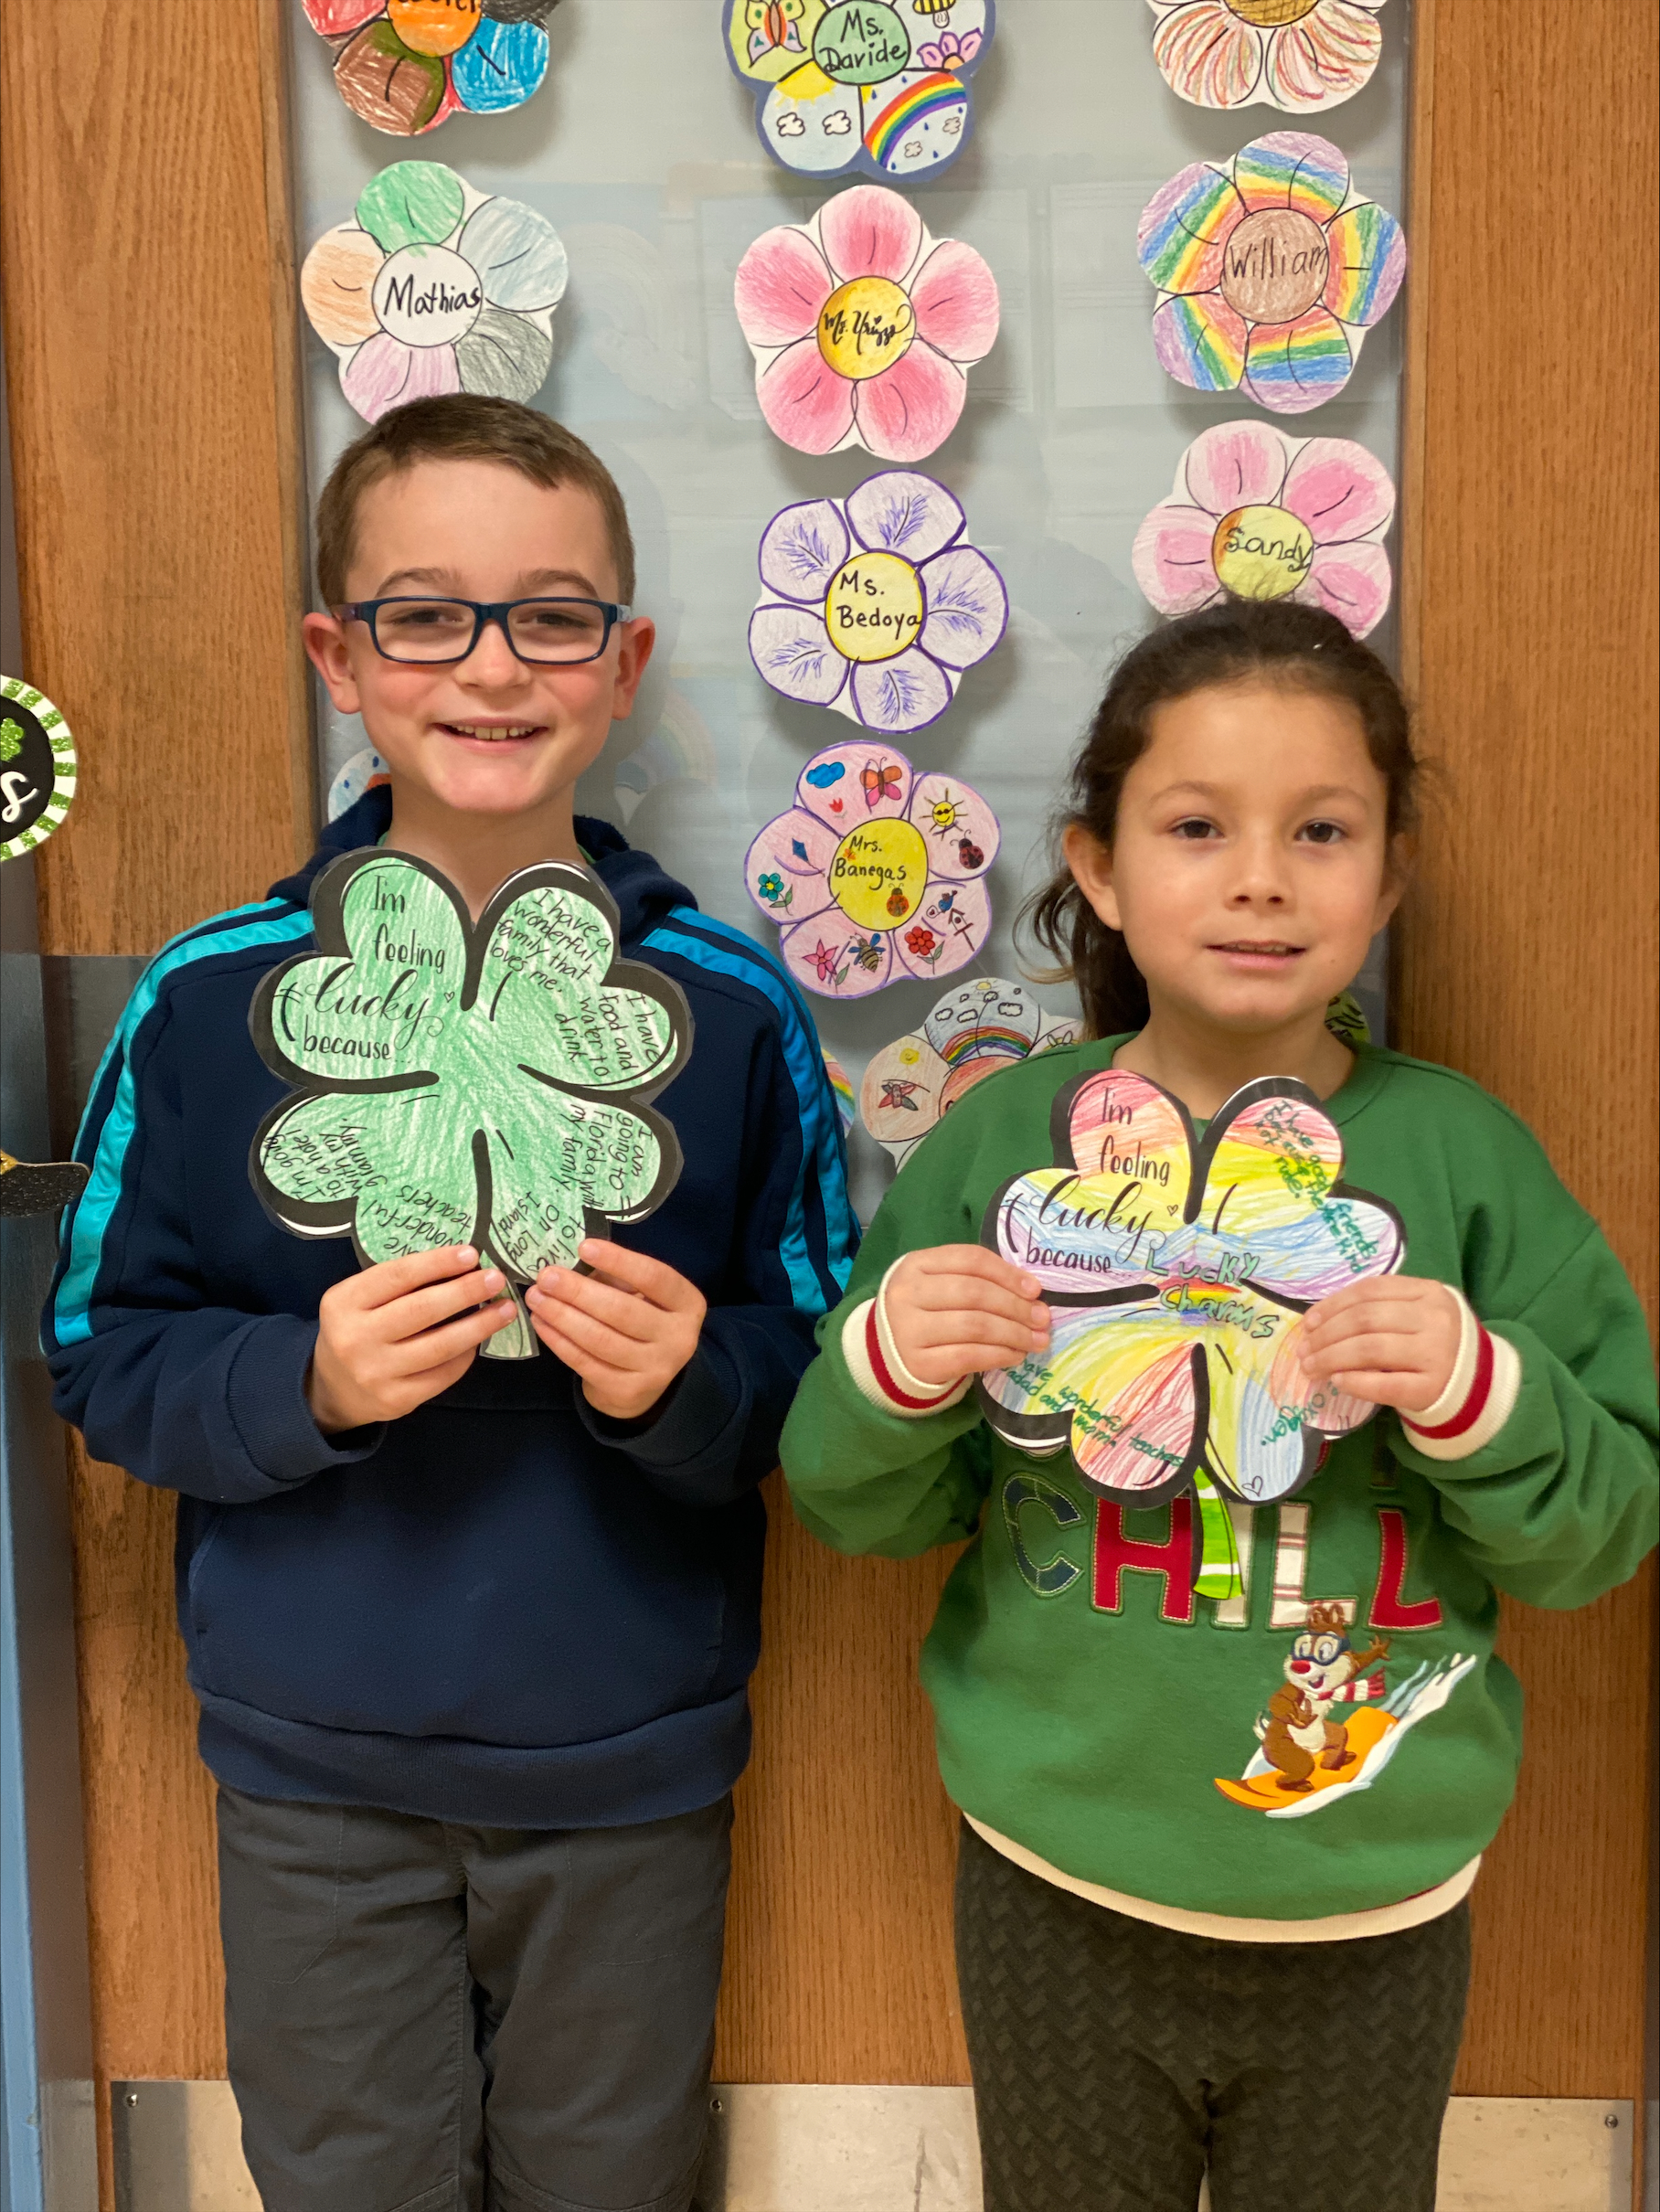 Hampton Bays Elementary School students are gearing up for St. Patrick’s Day through a variety of fun and engaging learning activities, including an activity in Claire Urizzo’s third grade class in which students practiced their writing skills by penning some of the reasons they feel lucky on paper shamrocks. Jennifer Warren’s third graders used paper shamrocks to
practice the different ways to represent fractions. They also jotted down the reasons they feel lucky on a decorative project featuring a rainbow and pot of gold.